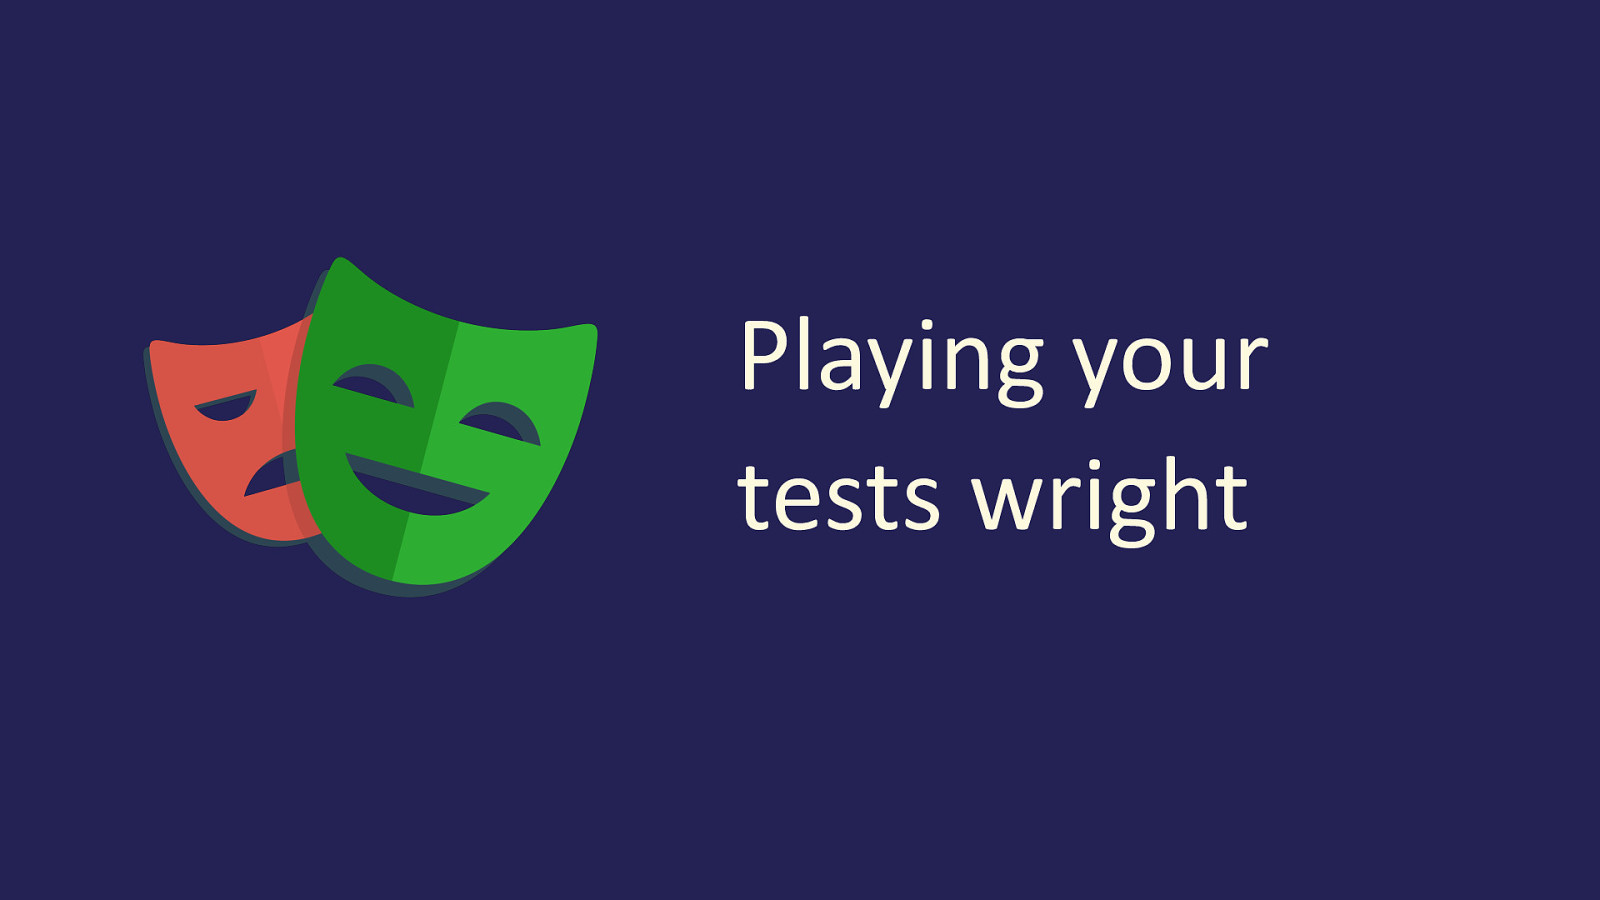 Playing your tests wright